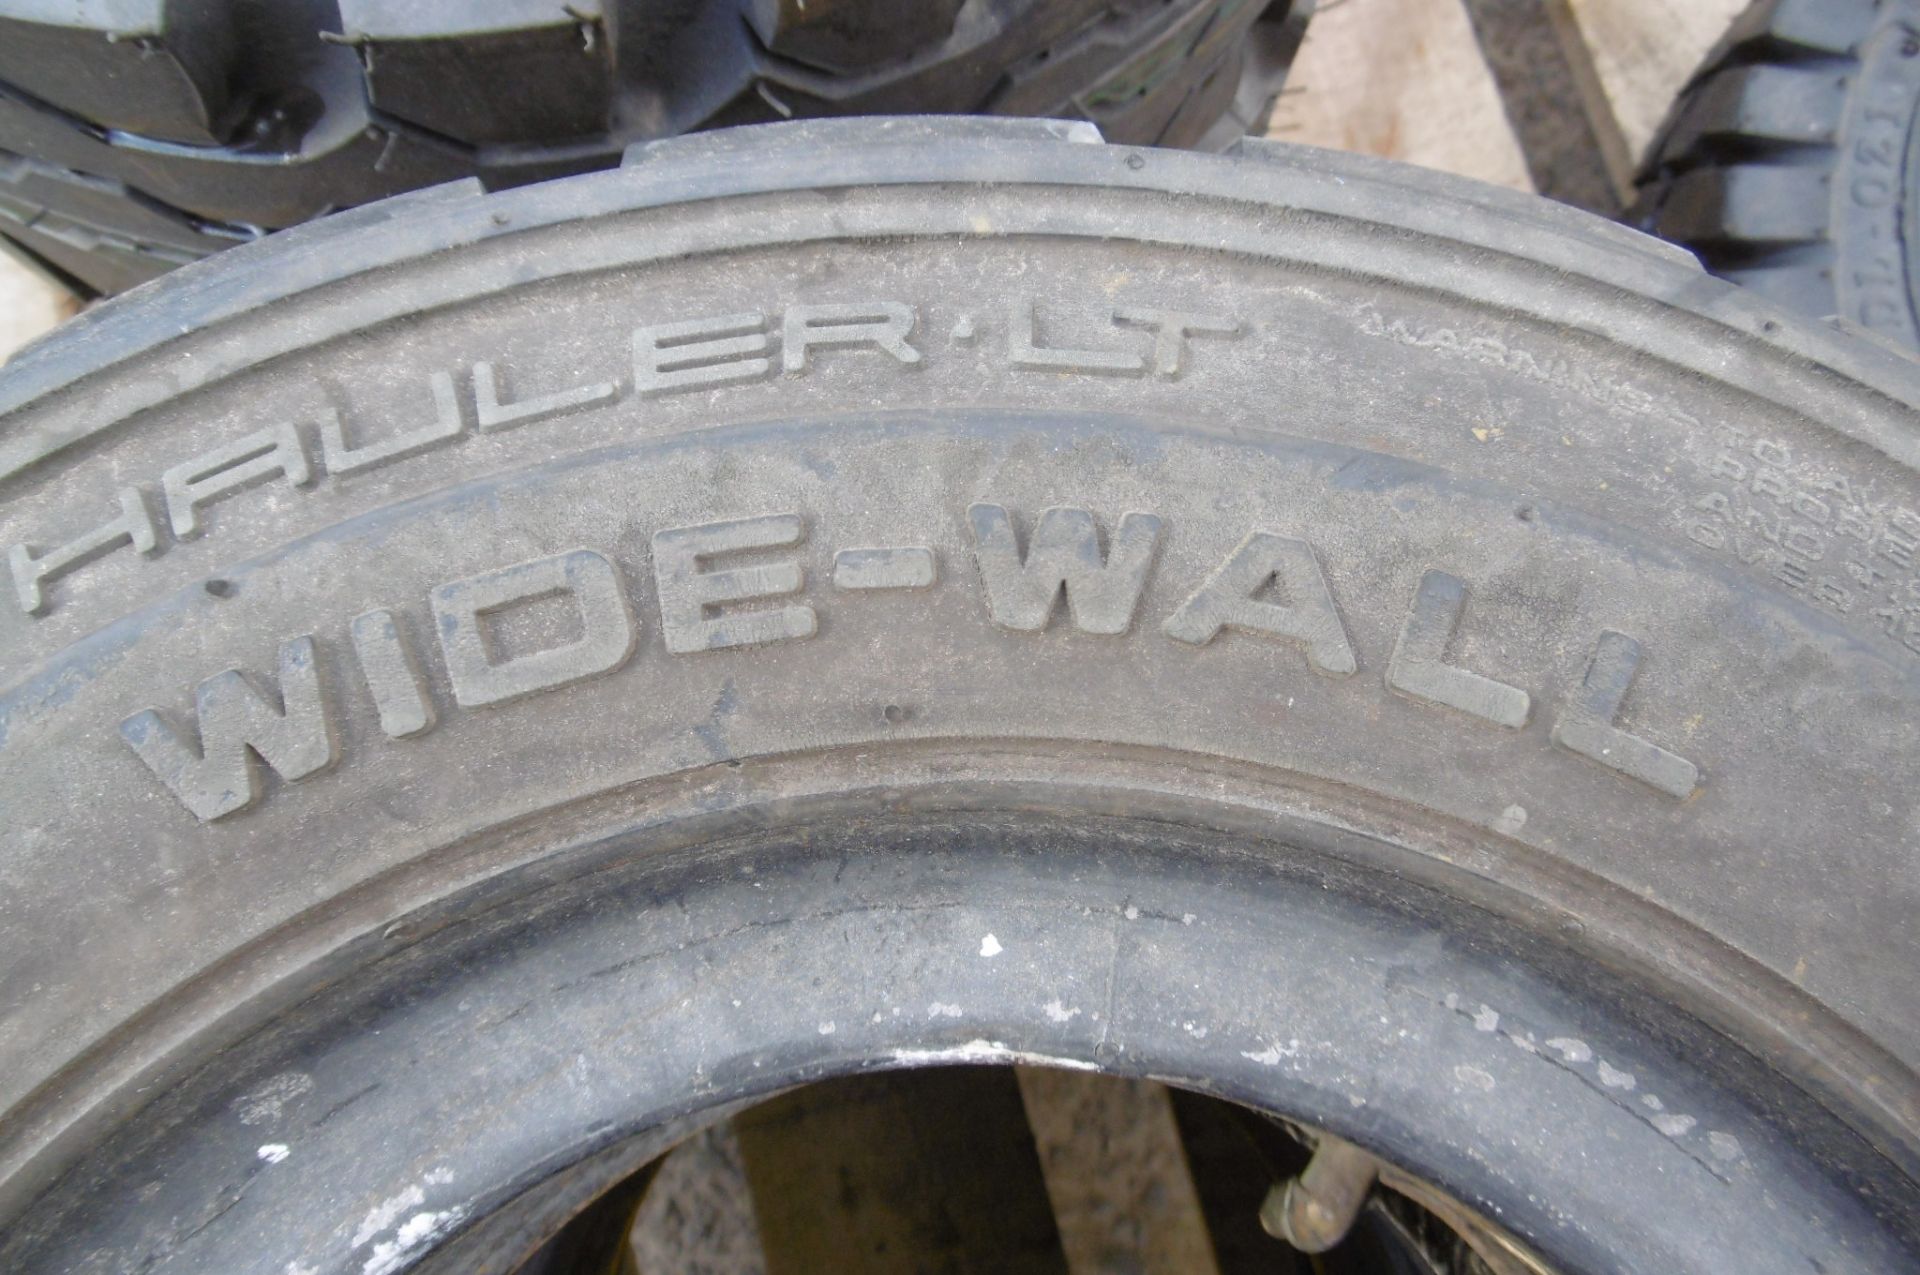 4 x Mixed 18x7-8 Continental and Widewall Tyres and 1 x Watts 4.00x8 Tyre - Image 8 of 10